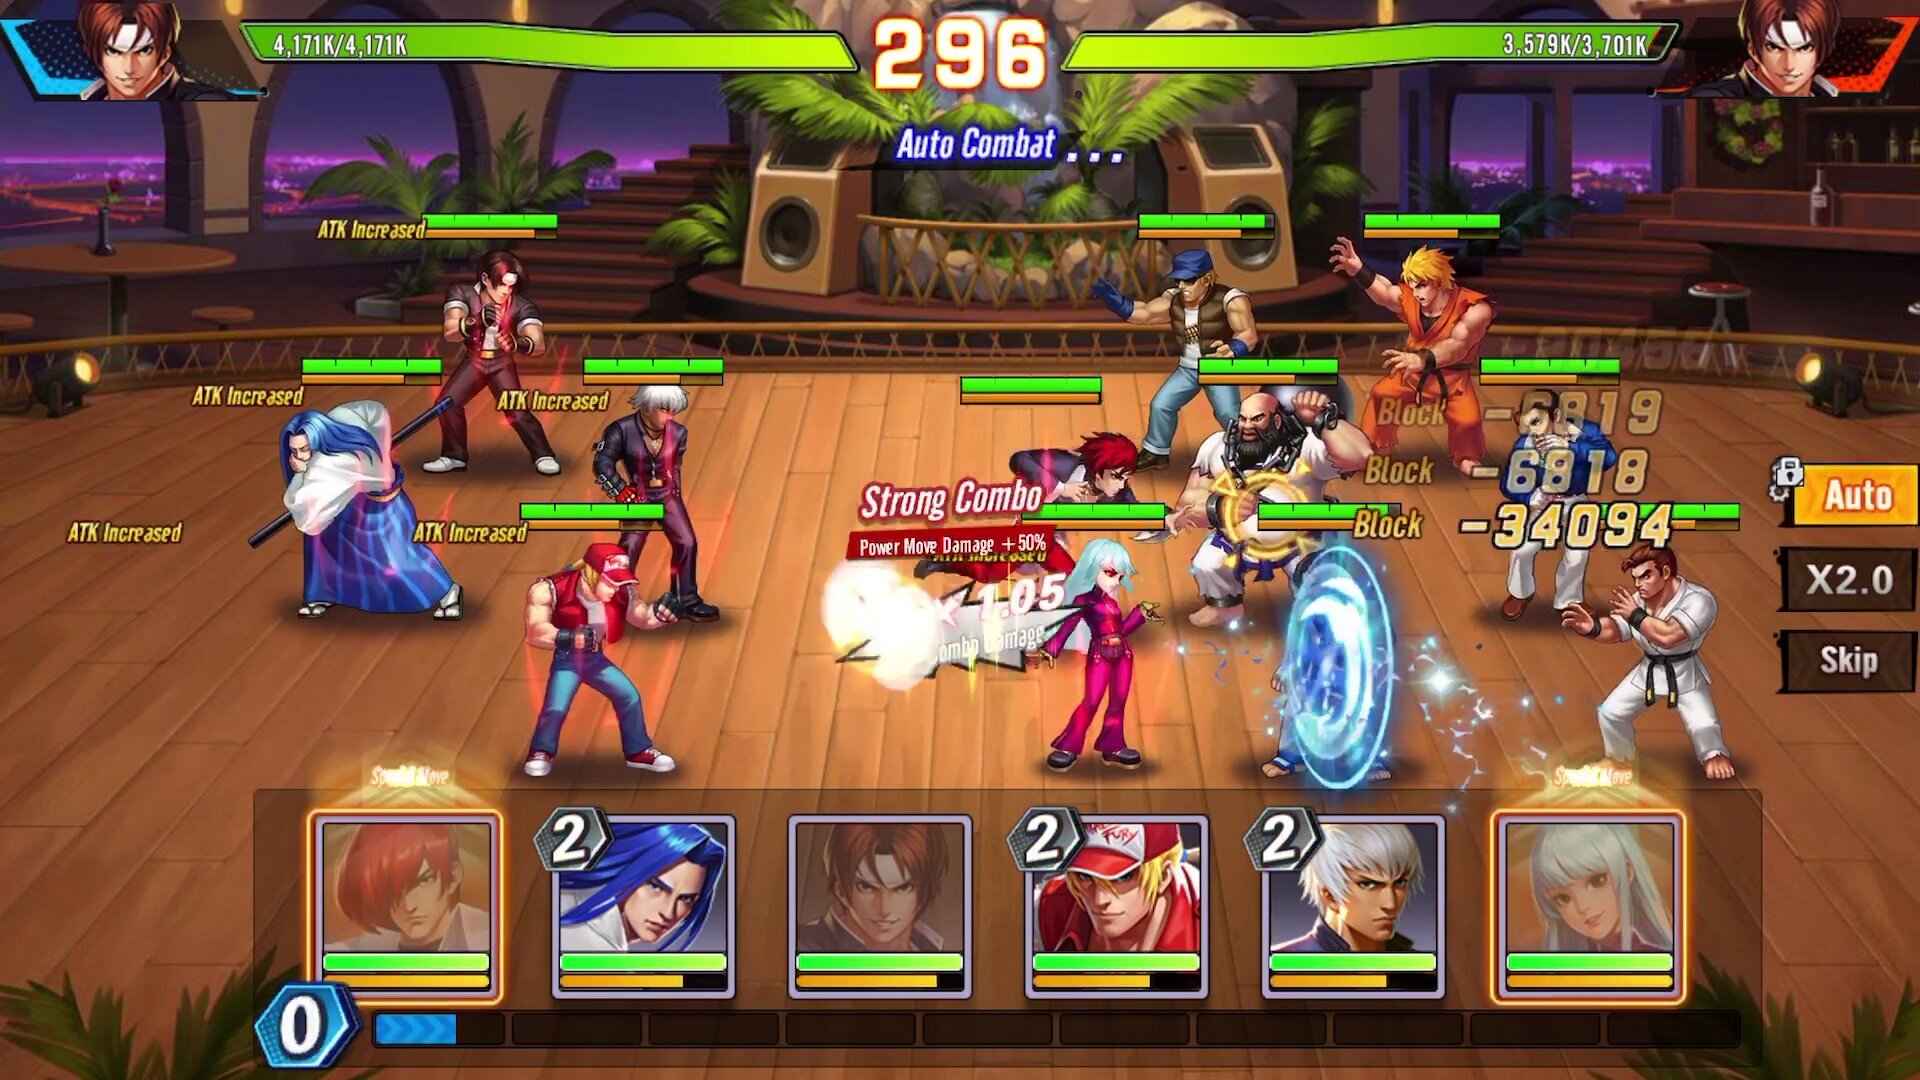 The Original King Of Fighters '98 Game Comes To iOS And Android, Download  Now!